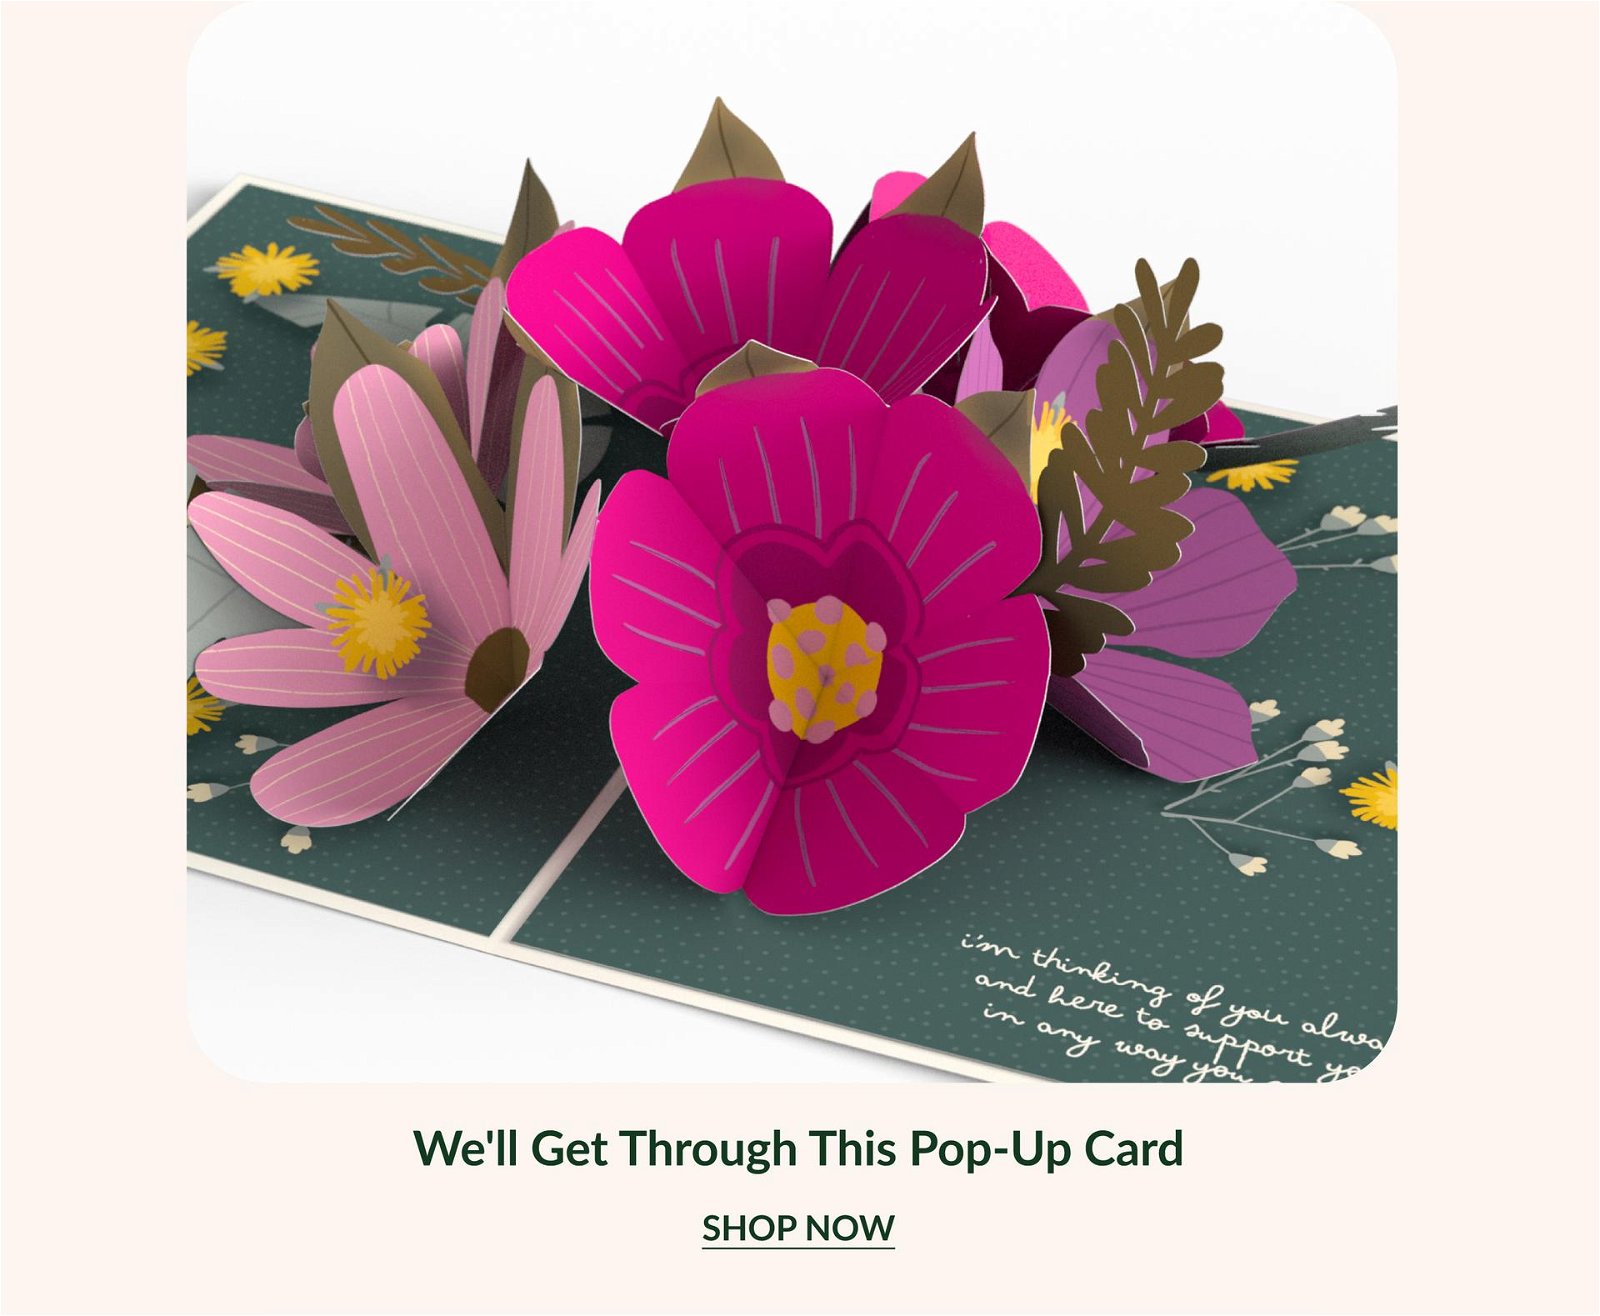 We'll Get Through This Pop-Up Card